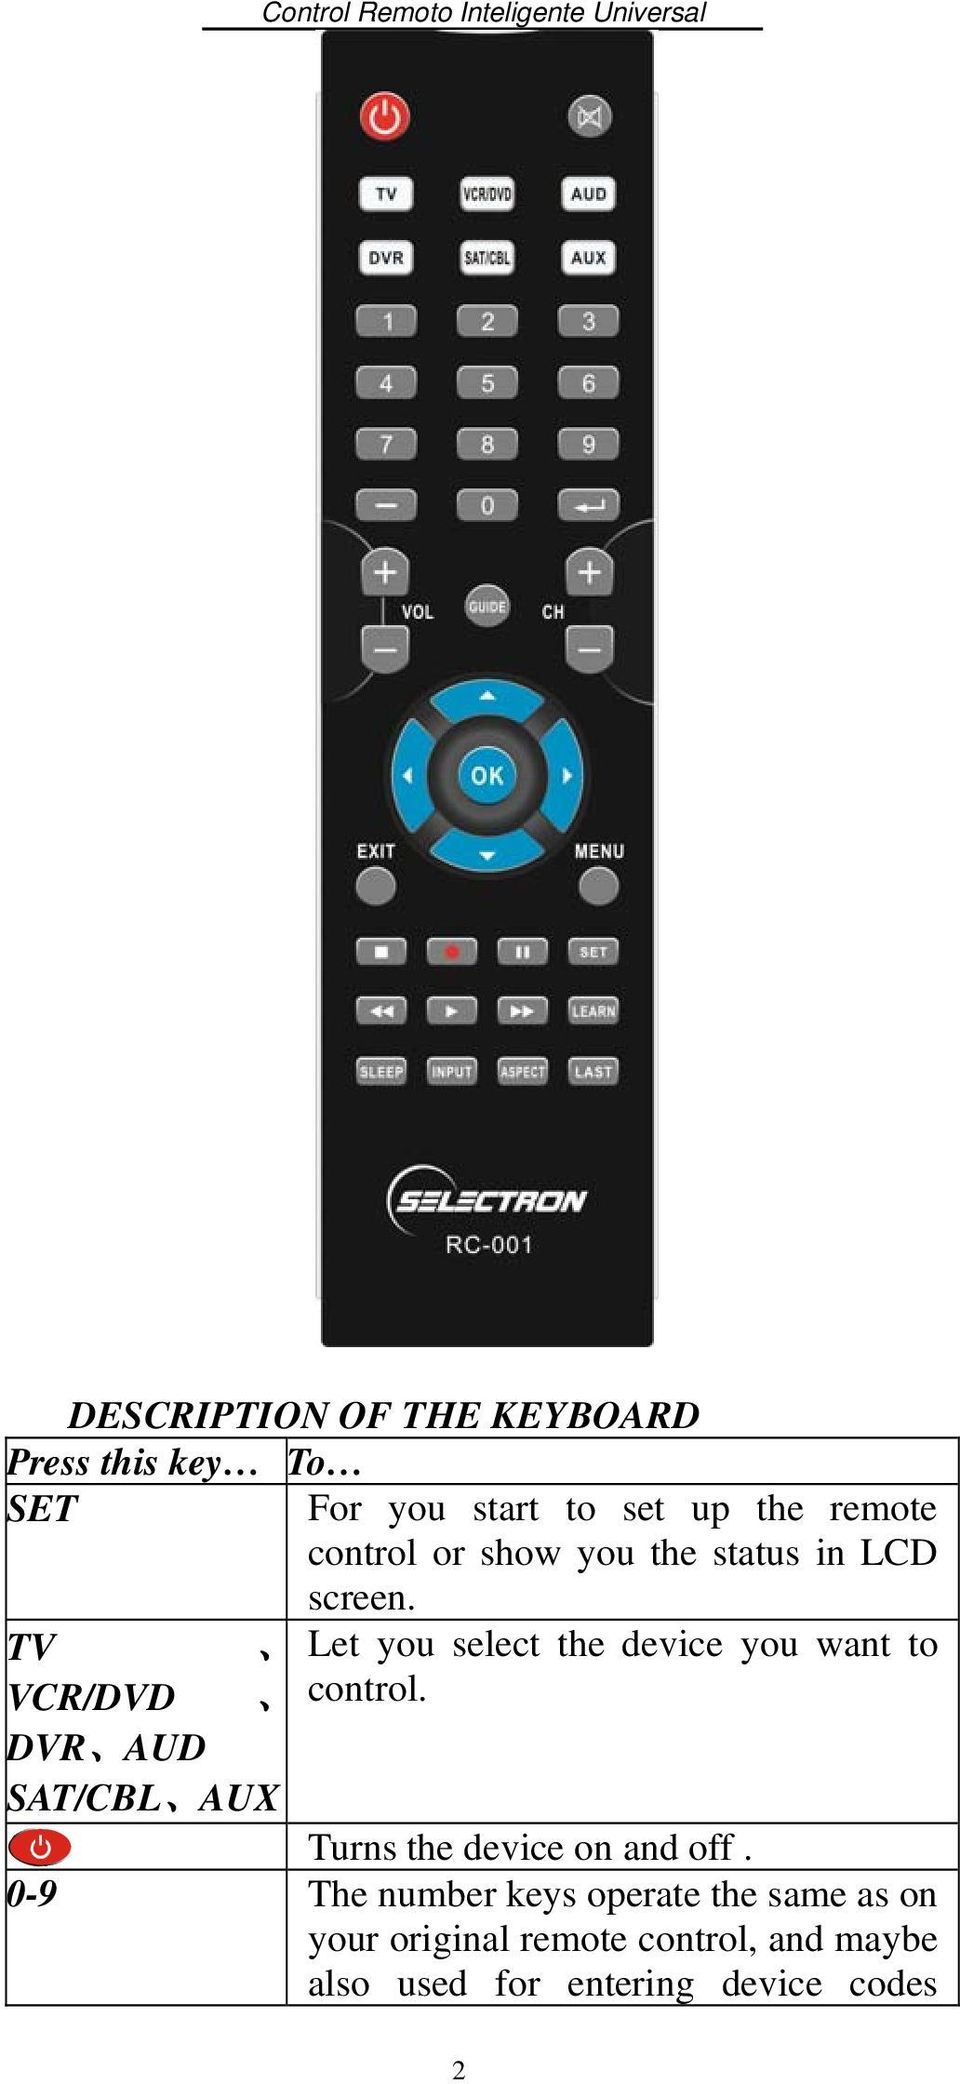 TV Let you select the device you want to VCR/DVD control.